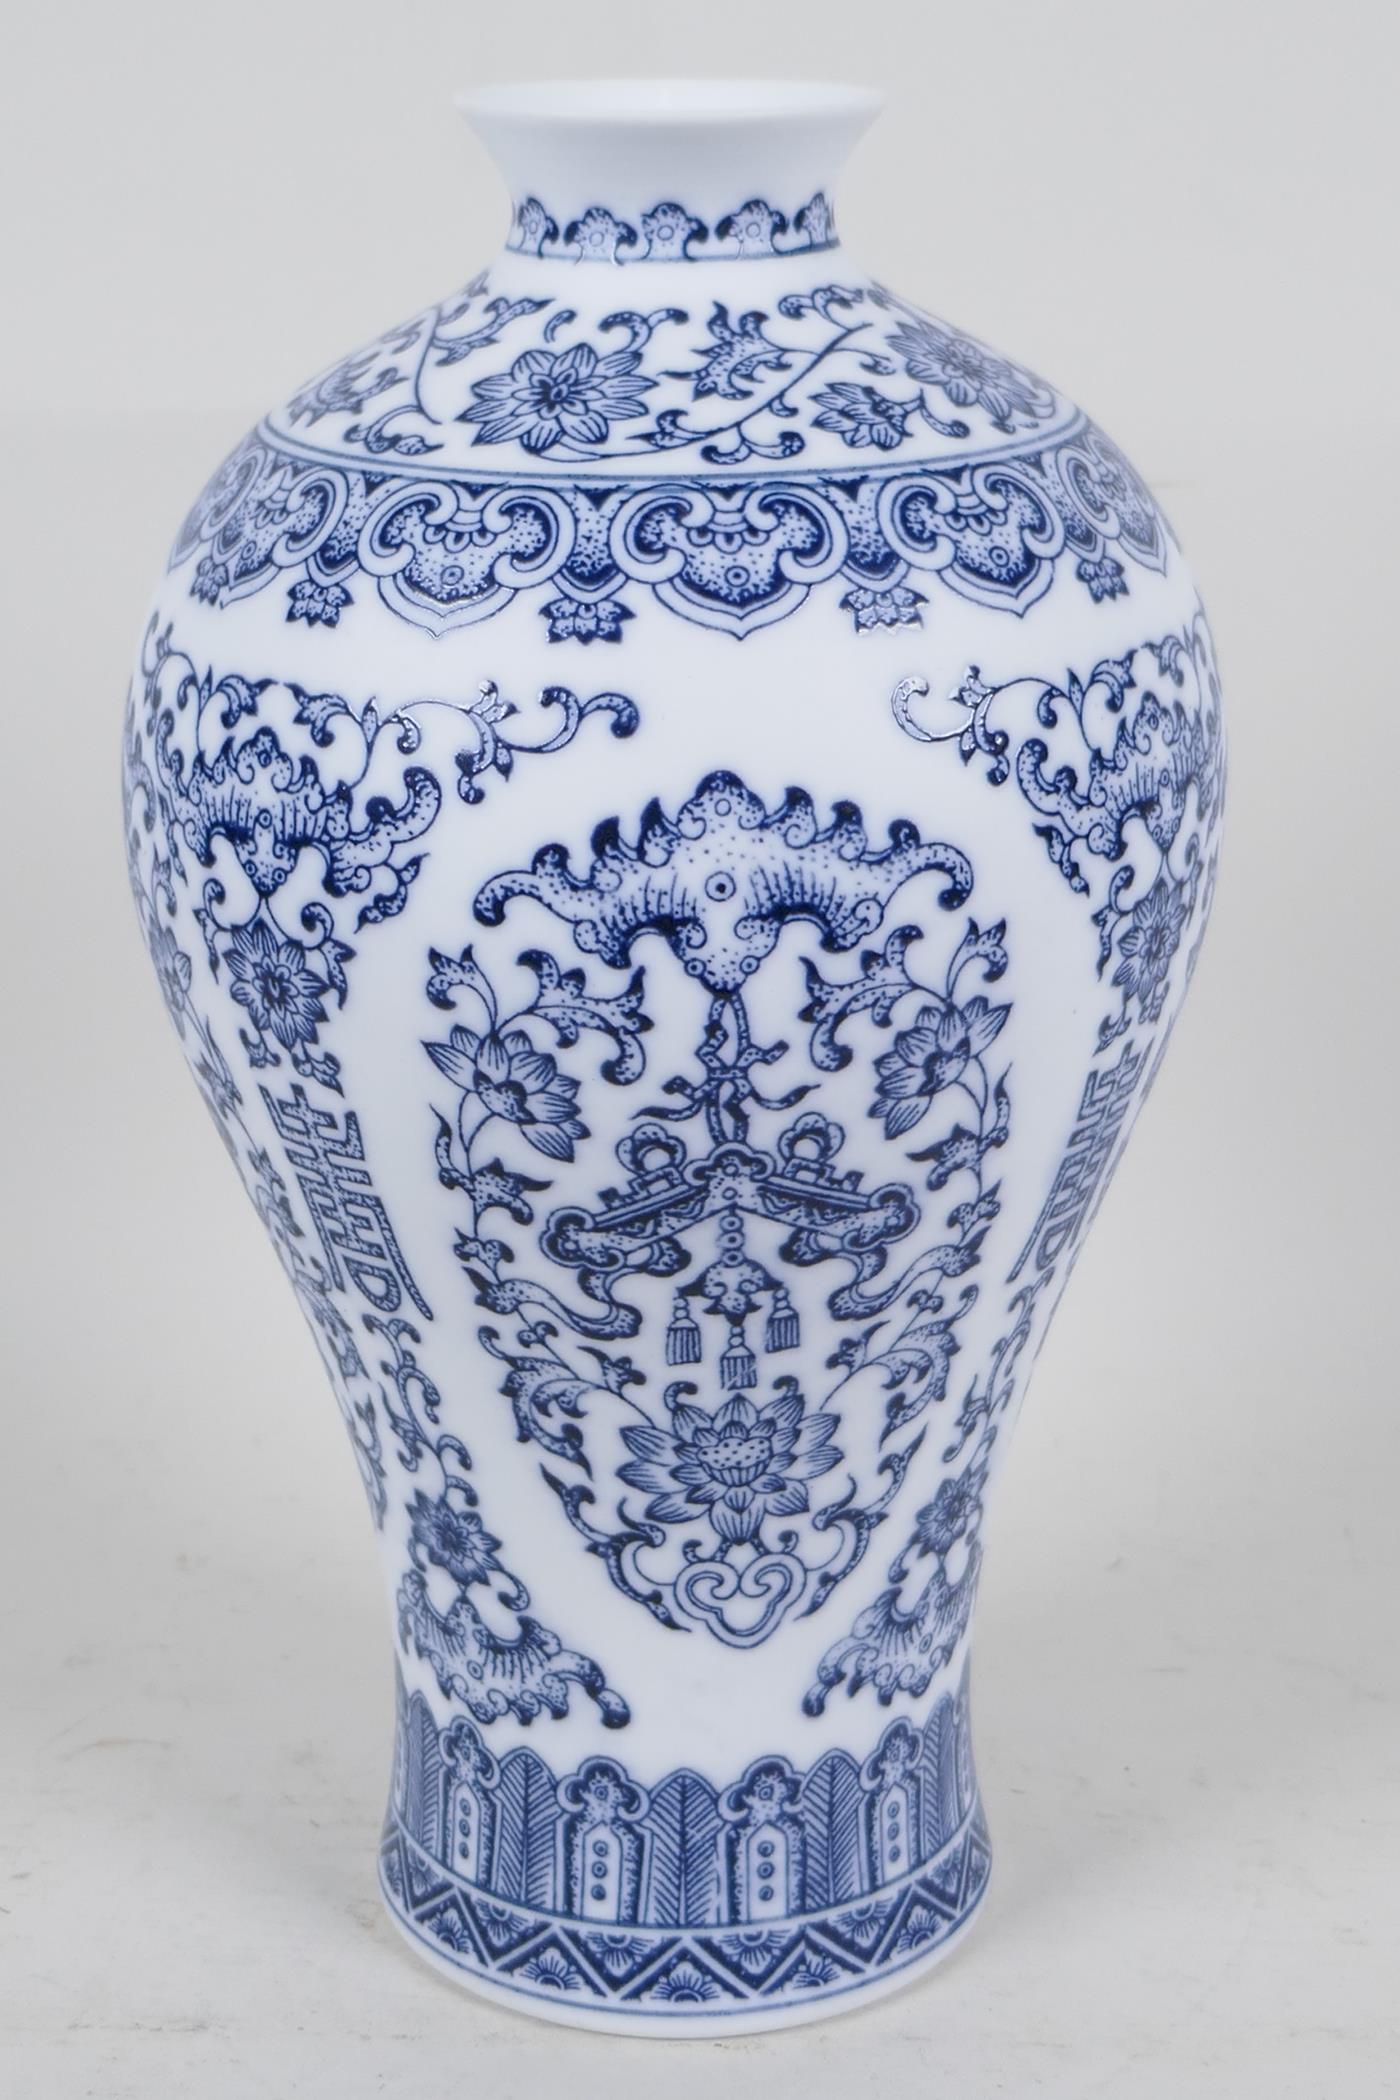 A Chinese blue and white meiping vase with character and floral decoration, 9" high - Image 2 of 4